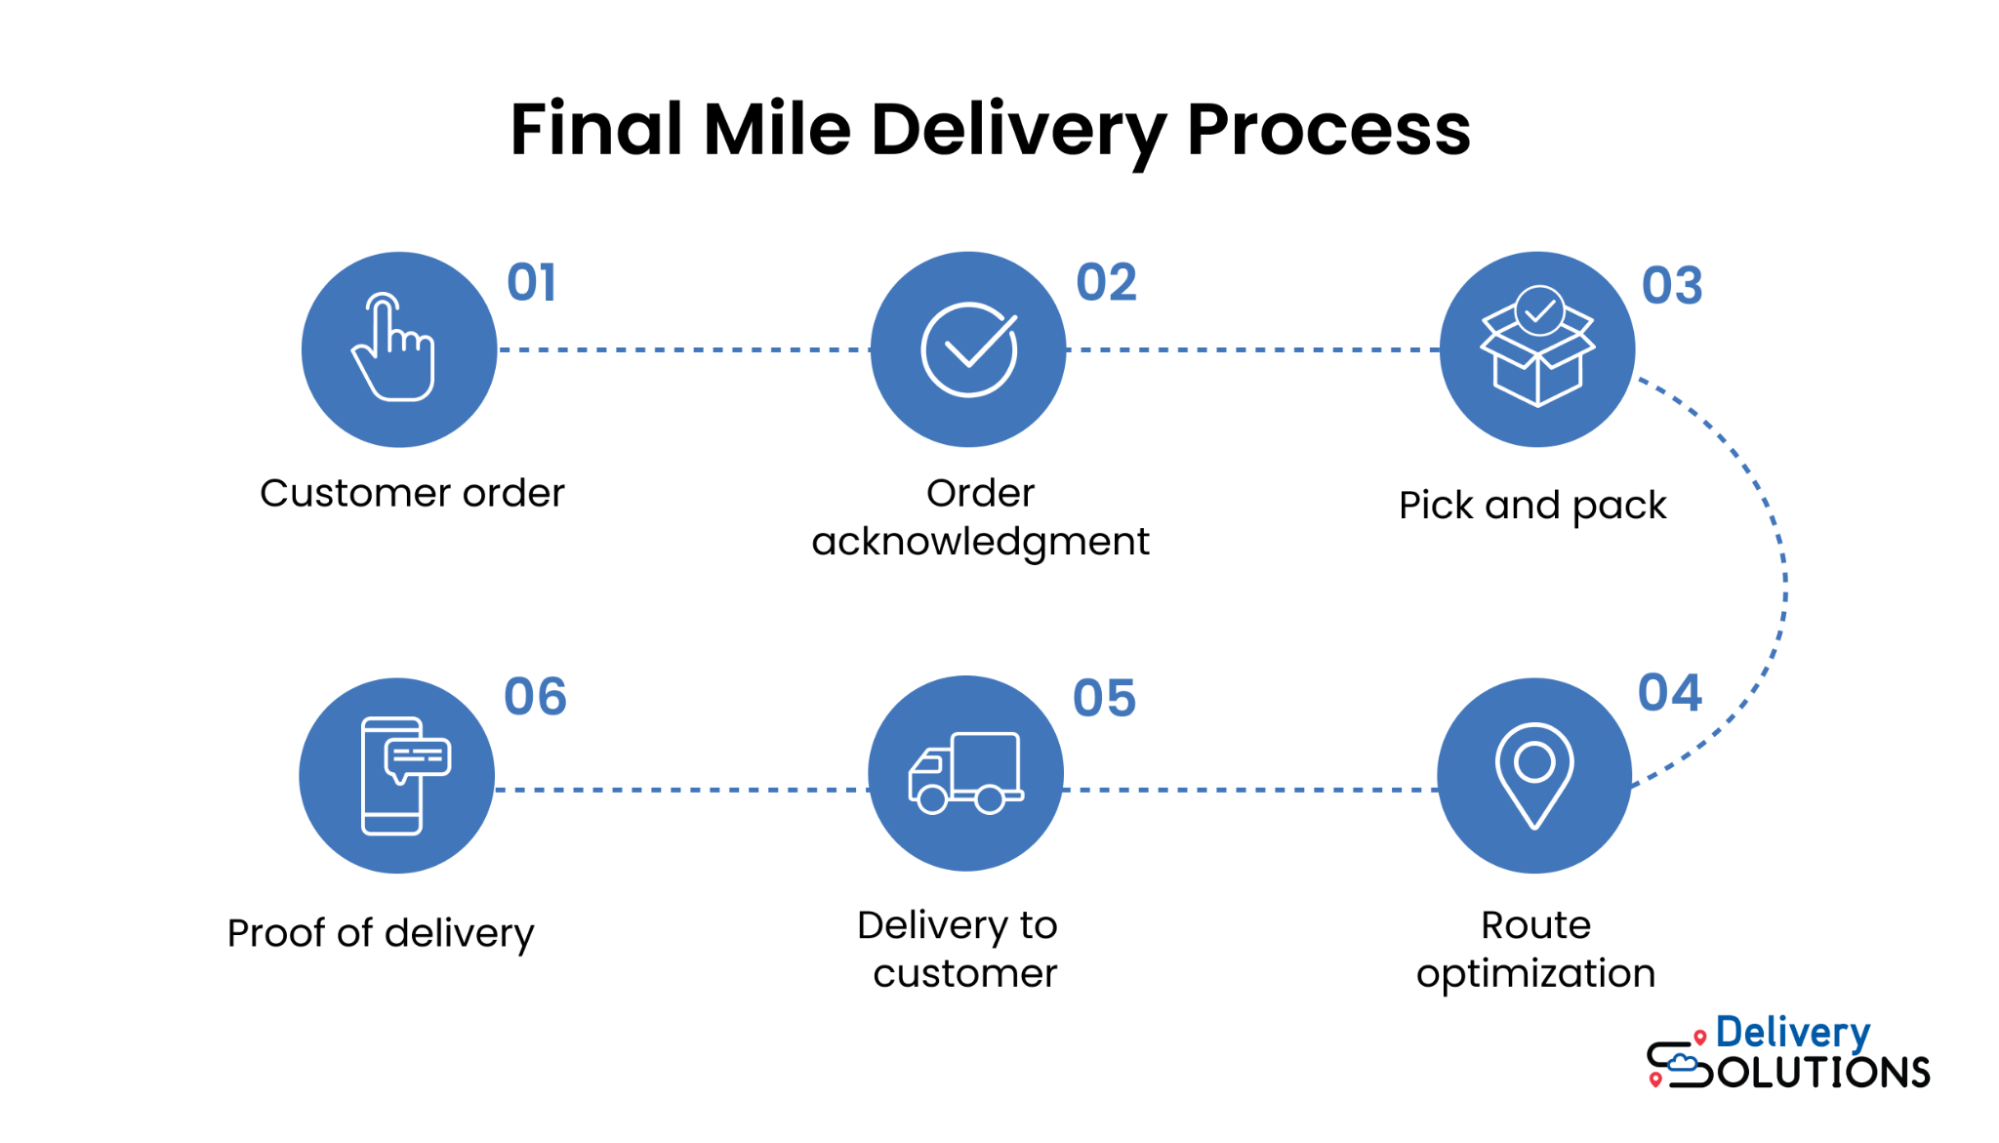 Final mile delivery workflow flowchart